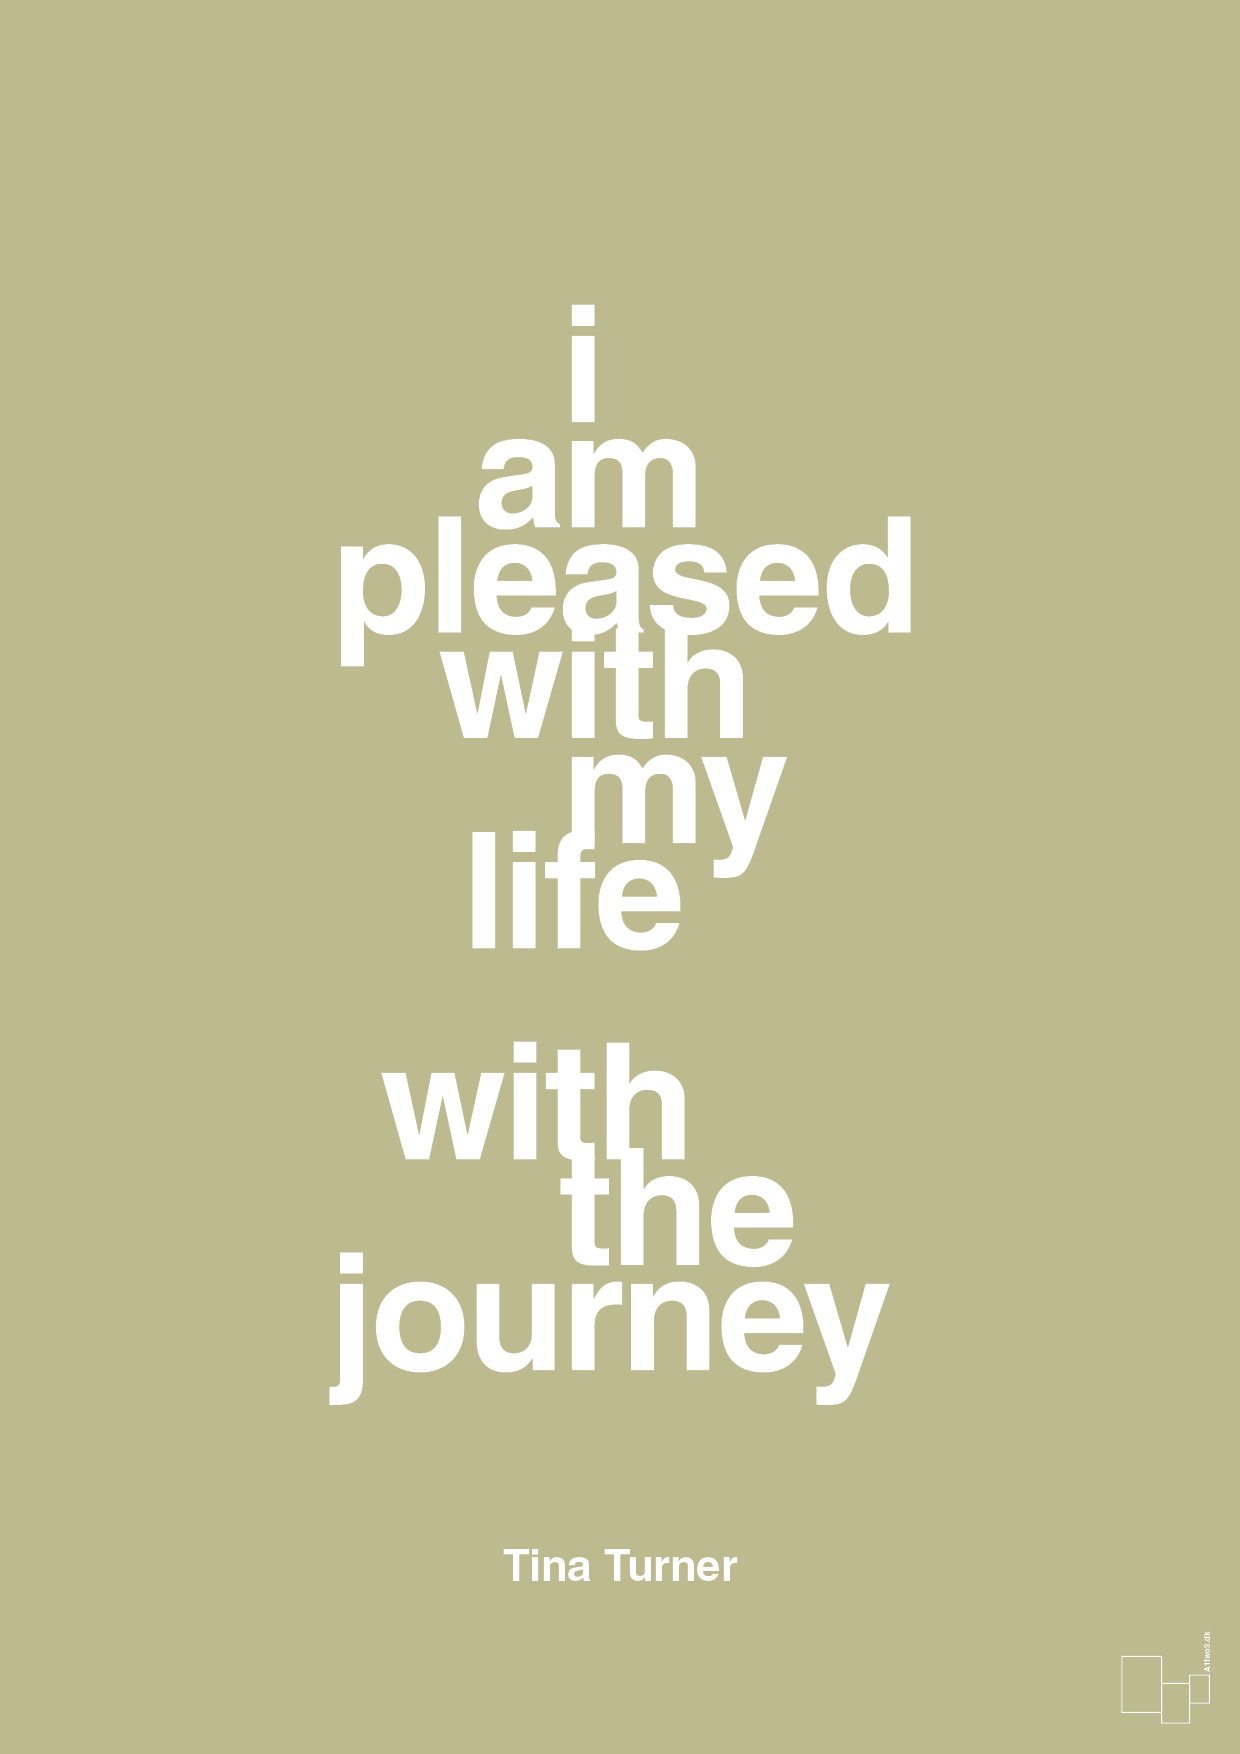 i am pleased with my life with the journey - Plakat med Citater i Back to Nature